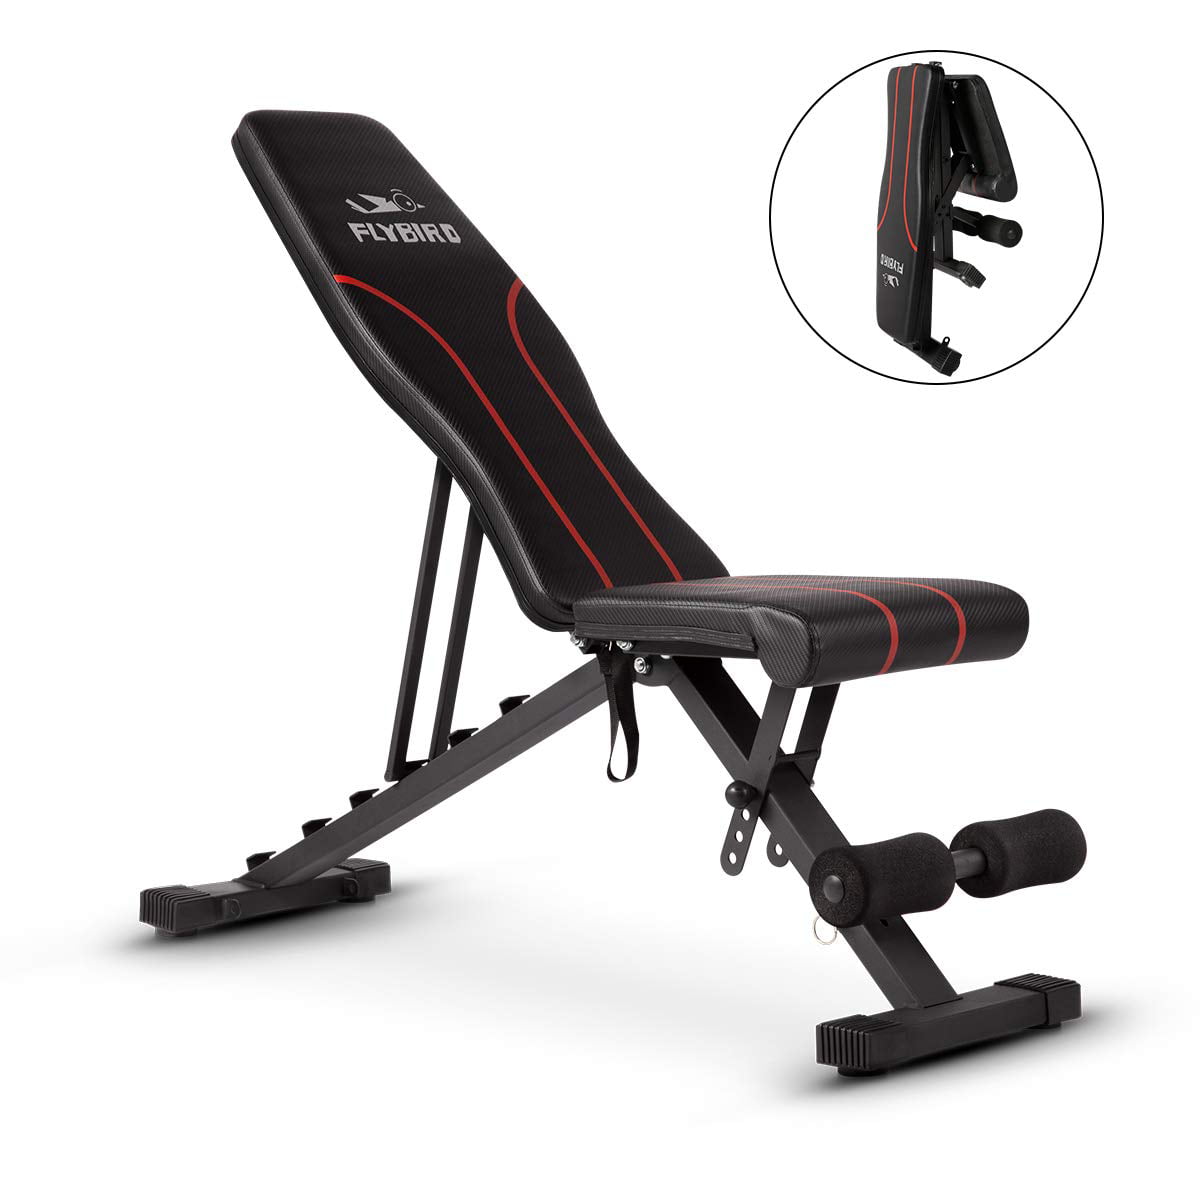 Details about   Adjustable Dumbbell Bench Foldable Workout Bench Incline Abdominal Trainer 